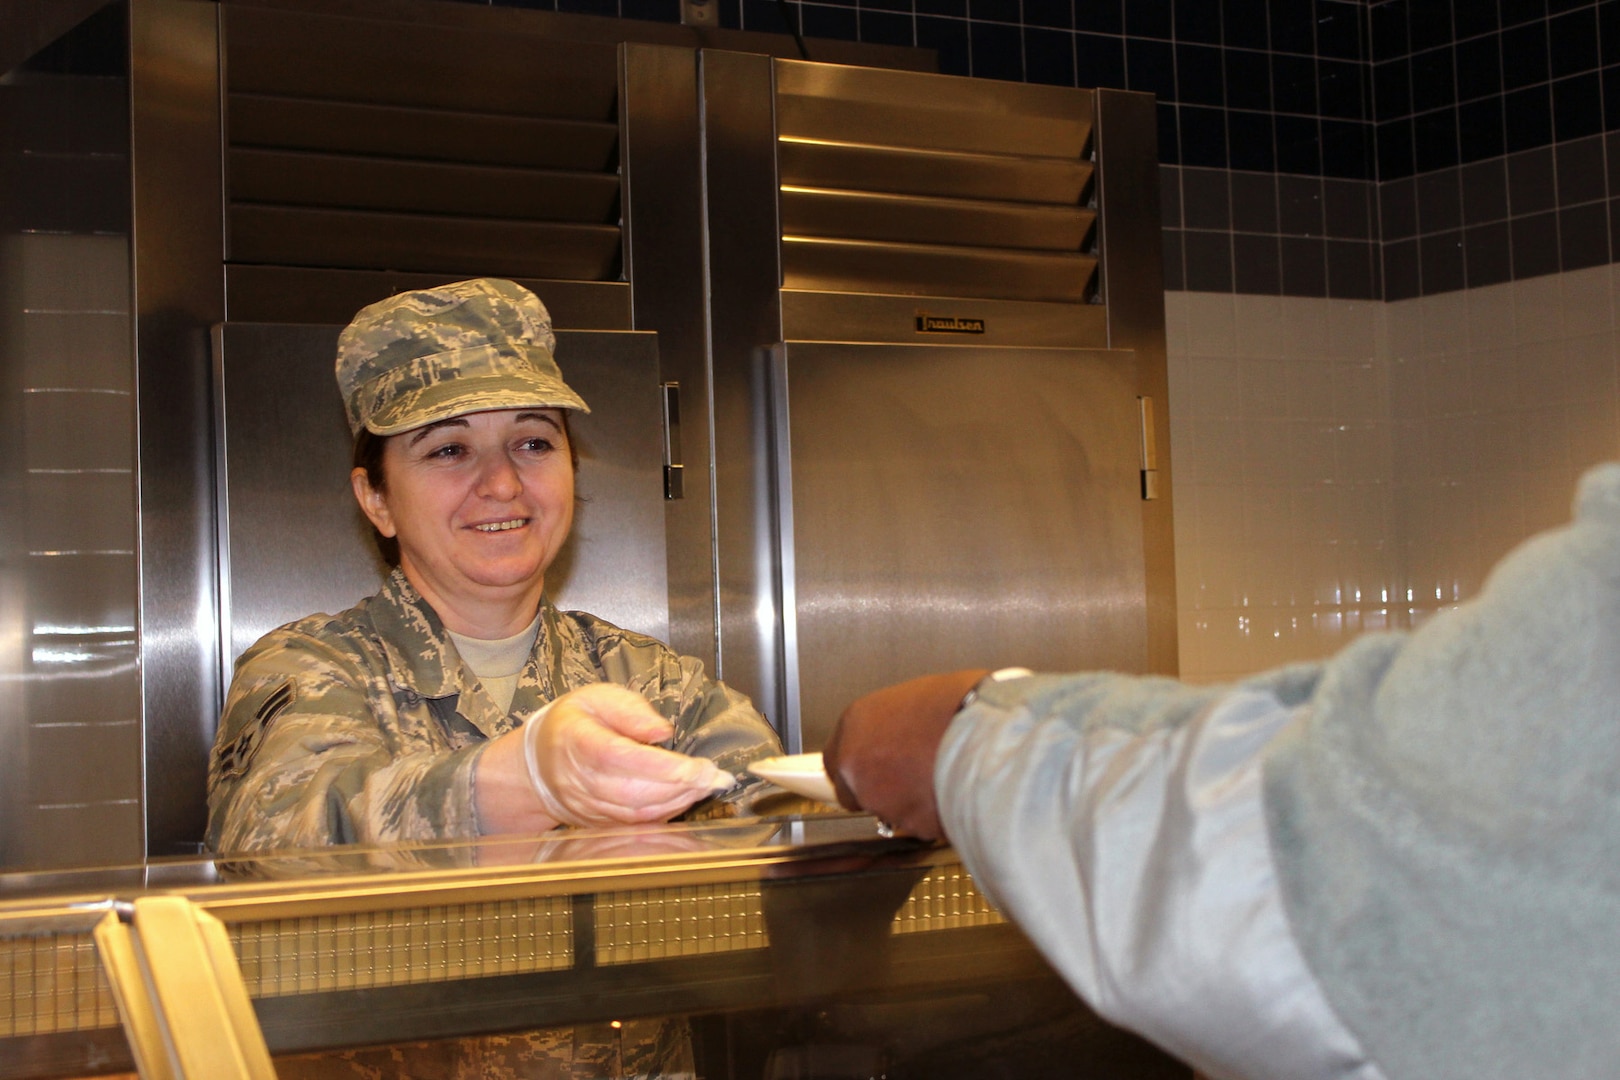 Airman 1st Class Elvira Shani serves an Airman during lunch at the Dining Facility at Selfridge Air National Guard Base, Mich., Feb. 8, 2014. Shani, a native of Albania, joined the Michigan Air National Guard on the day before her 40th birthday.